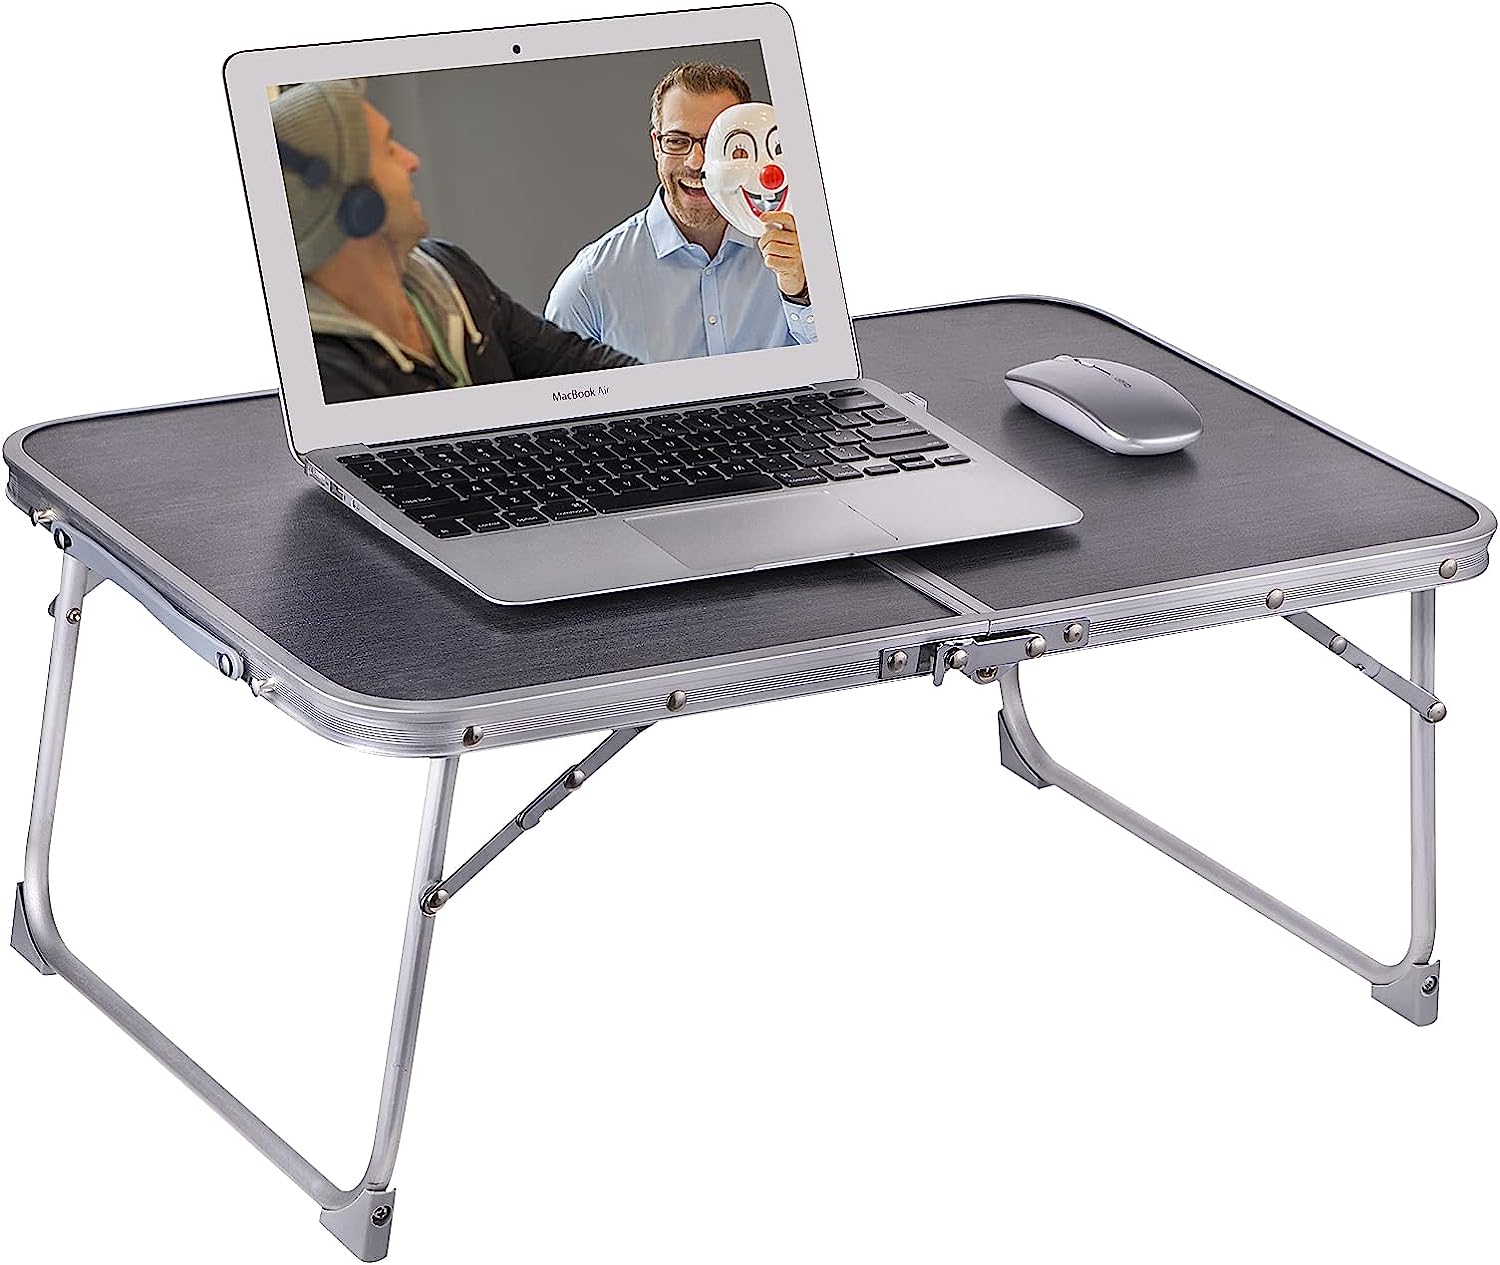 Foldable Laptop/ Bed Table for Study and Reading, [...]